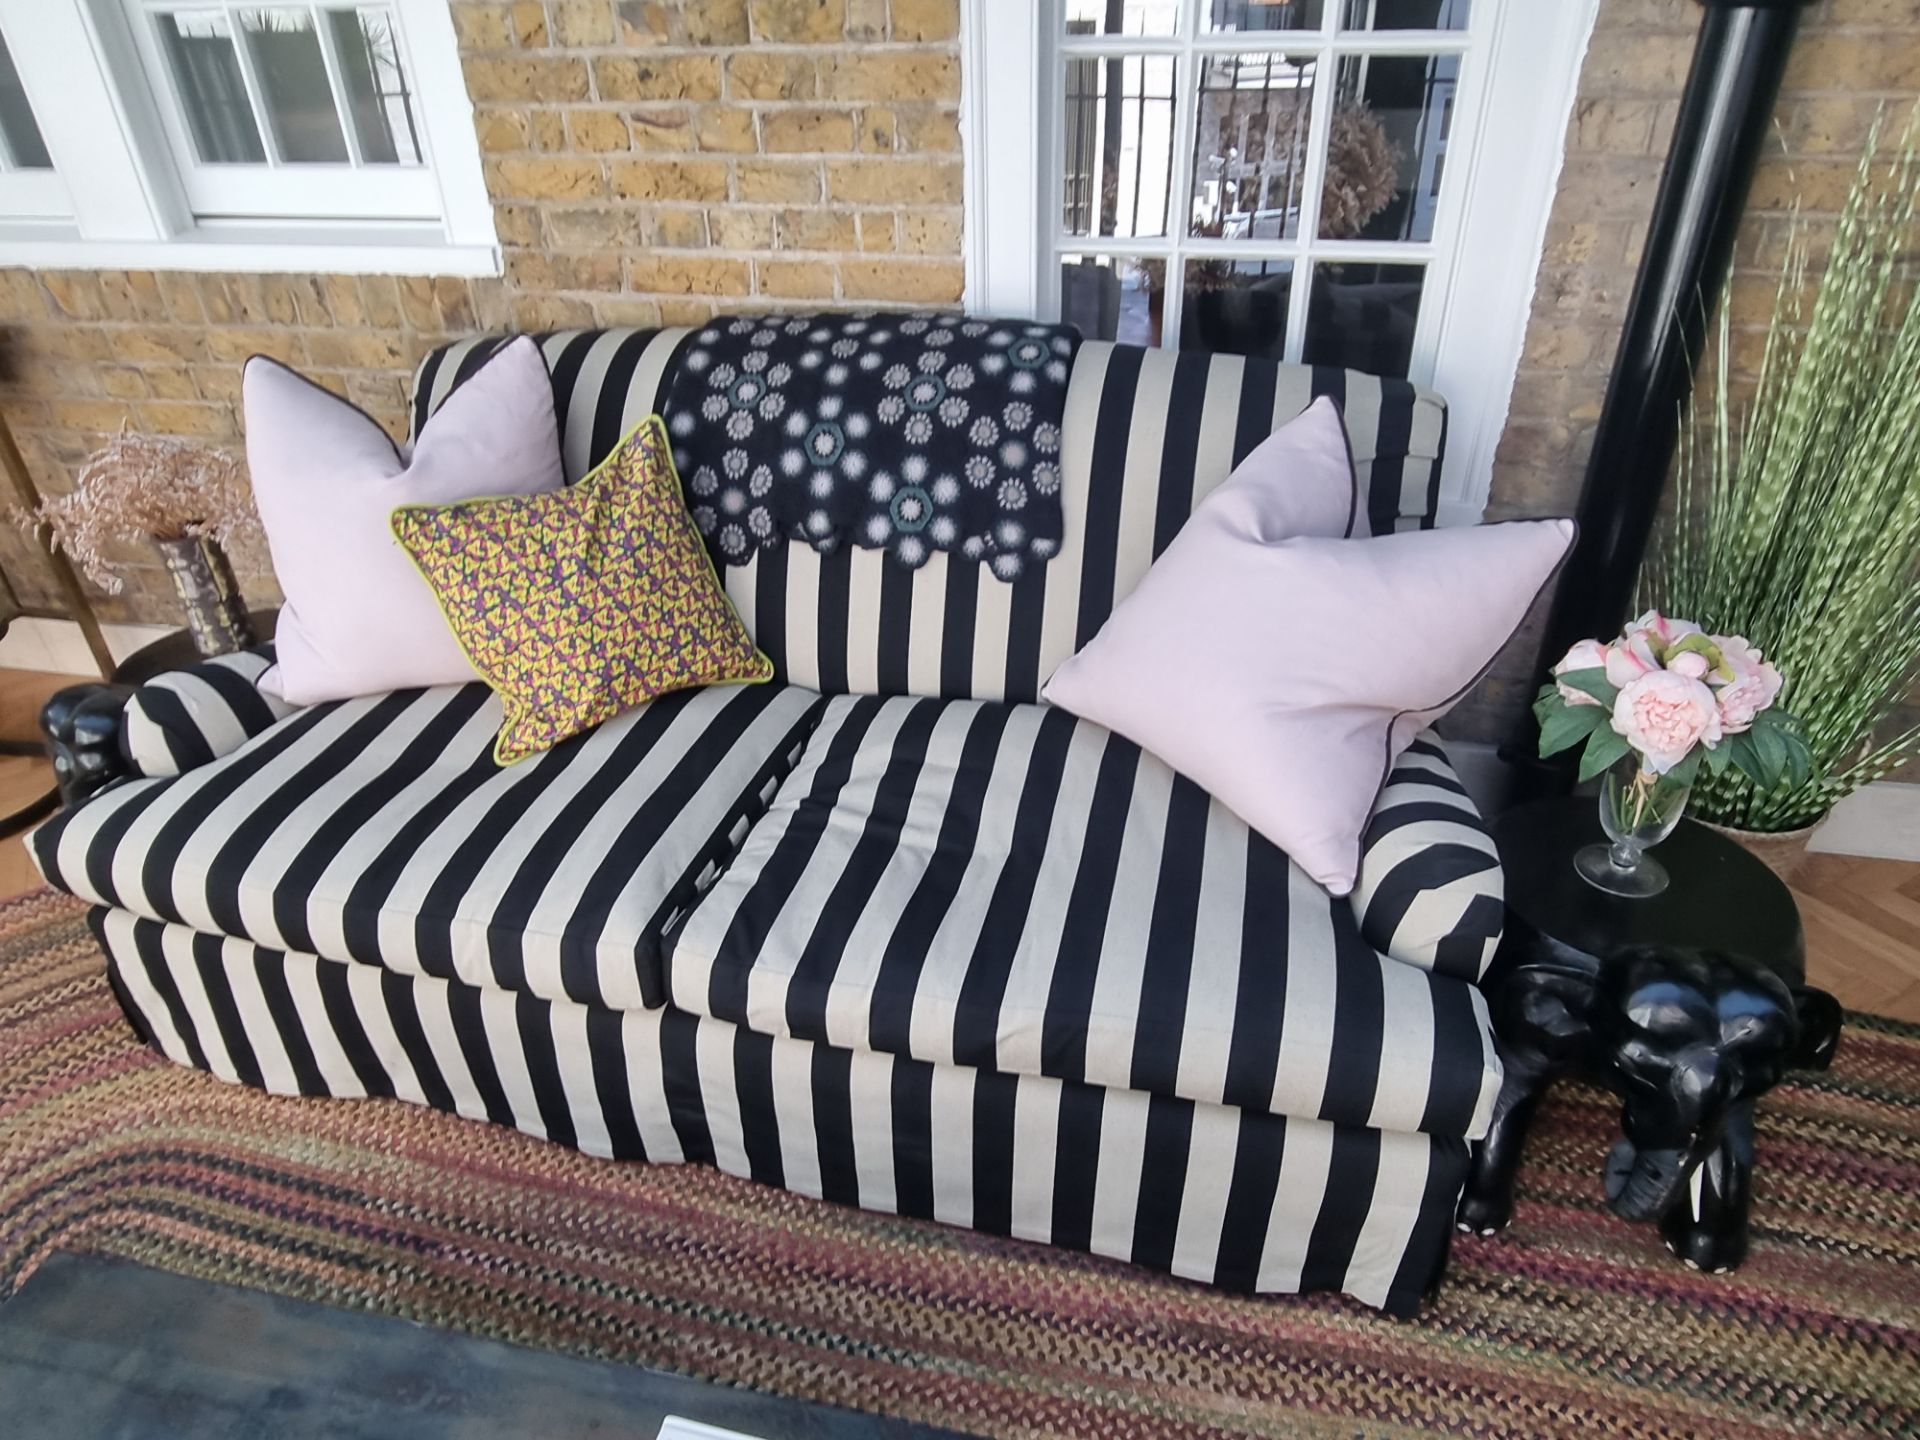 Signature Collection, Handmade Bespoke 3 seat Sofa with FR Slipcover in black and grey striped - Image 2 of 4